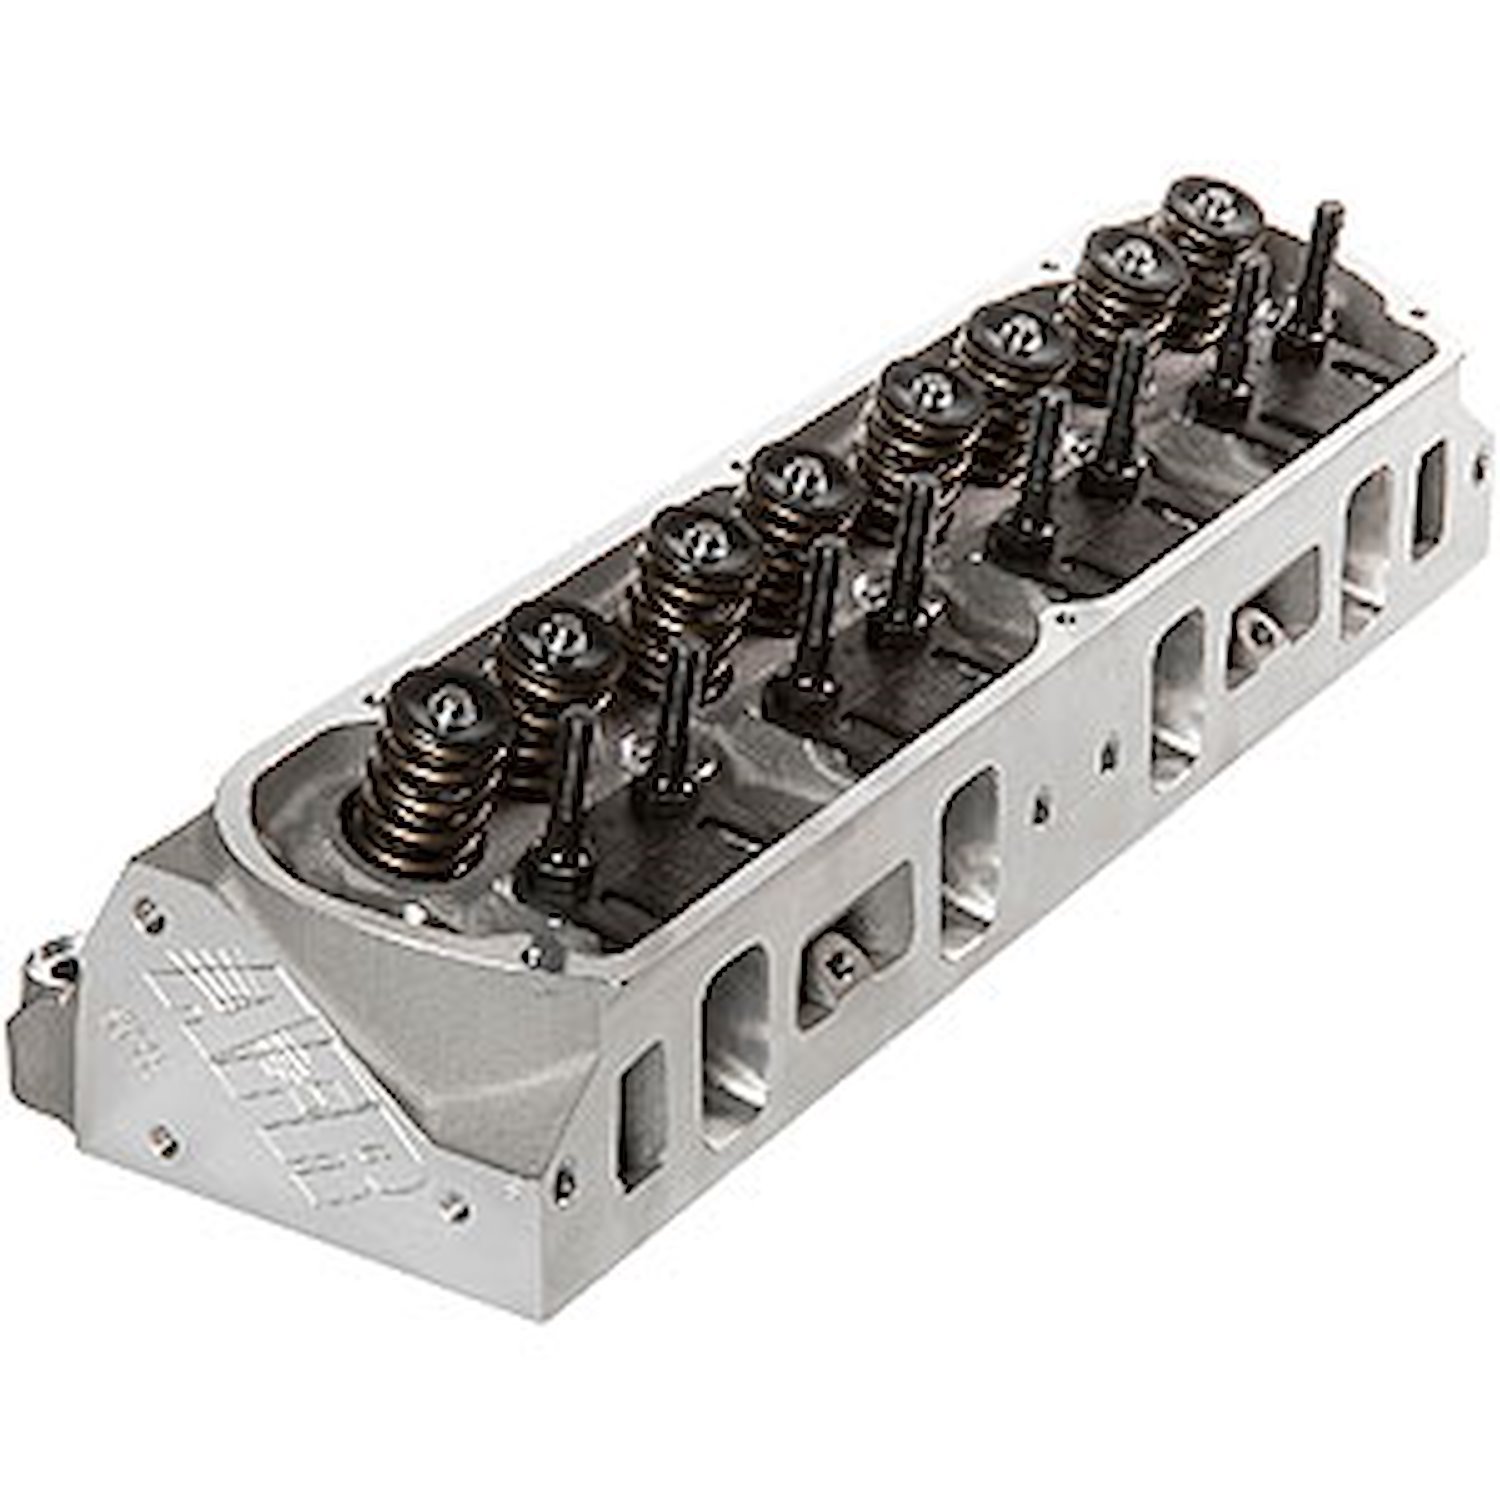 185cc Renegade Street Aluminum Cylinder Heads SB-Ford 72cc Combustion Chambers